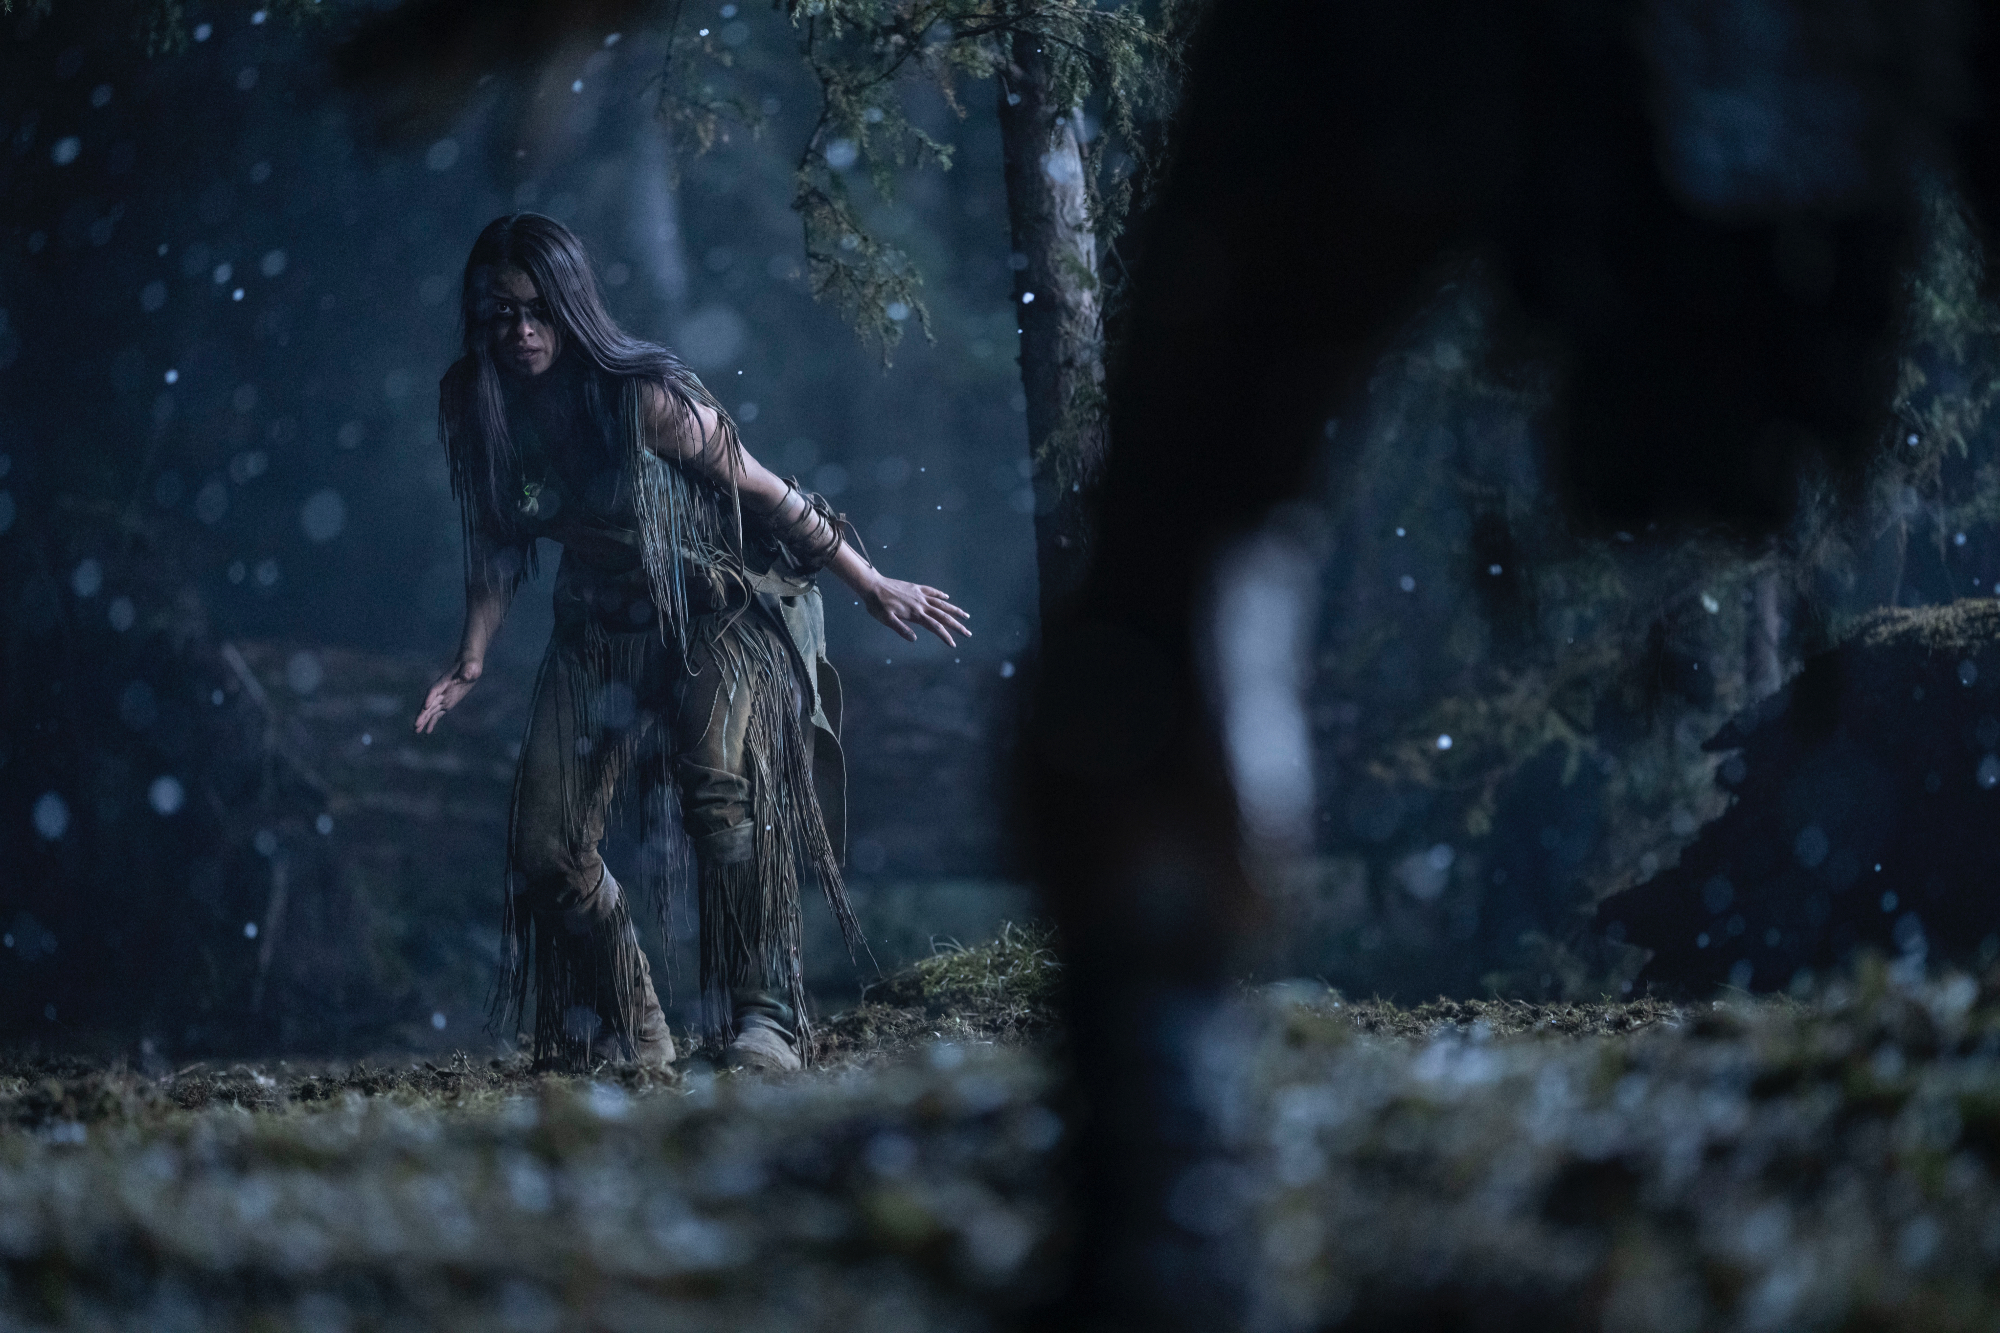 'Prey' Amber Midthunder as Naru and Dane DiLiegro as Predator. Naru is holding her hands out toward the ground and the Predator's leg is shown in the foreground.